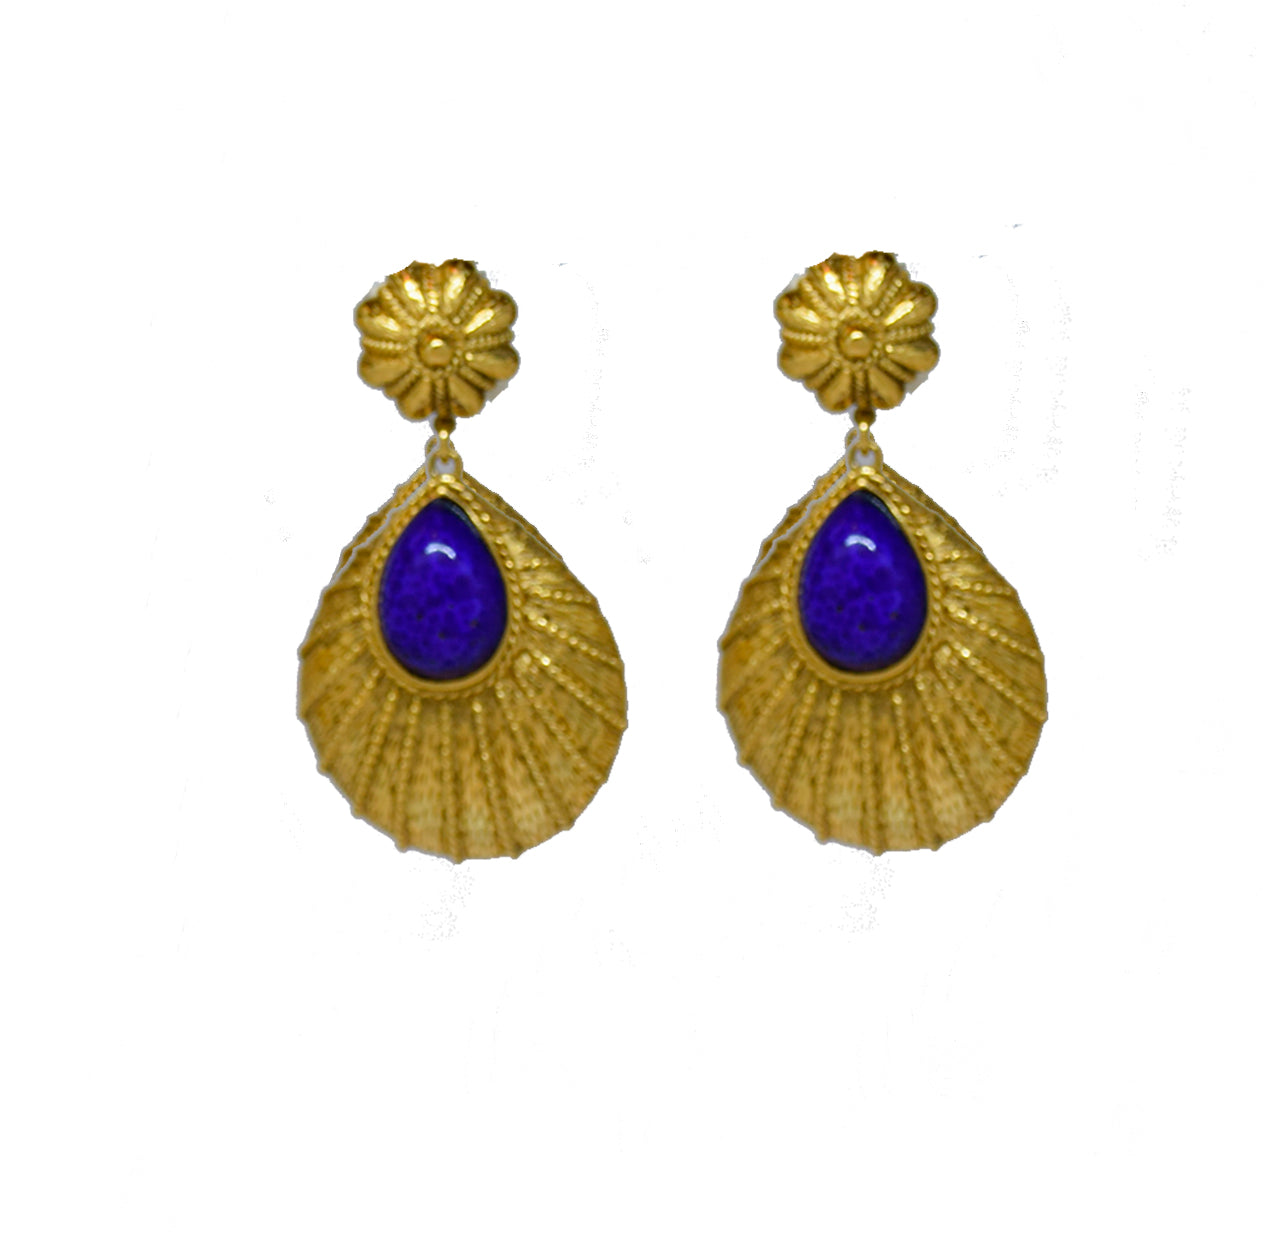 108 Textured 24 kt gold plated tear drop clip earring with navy stone